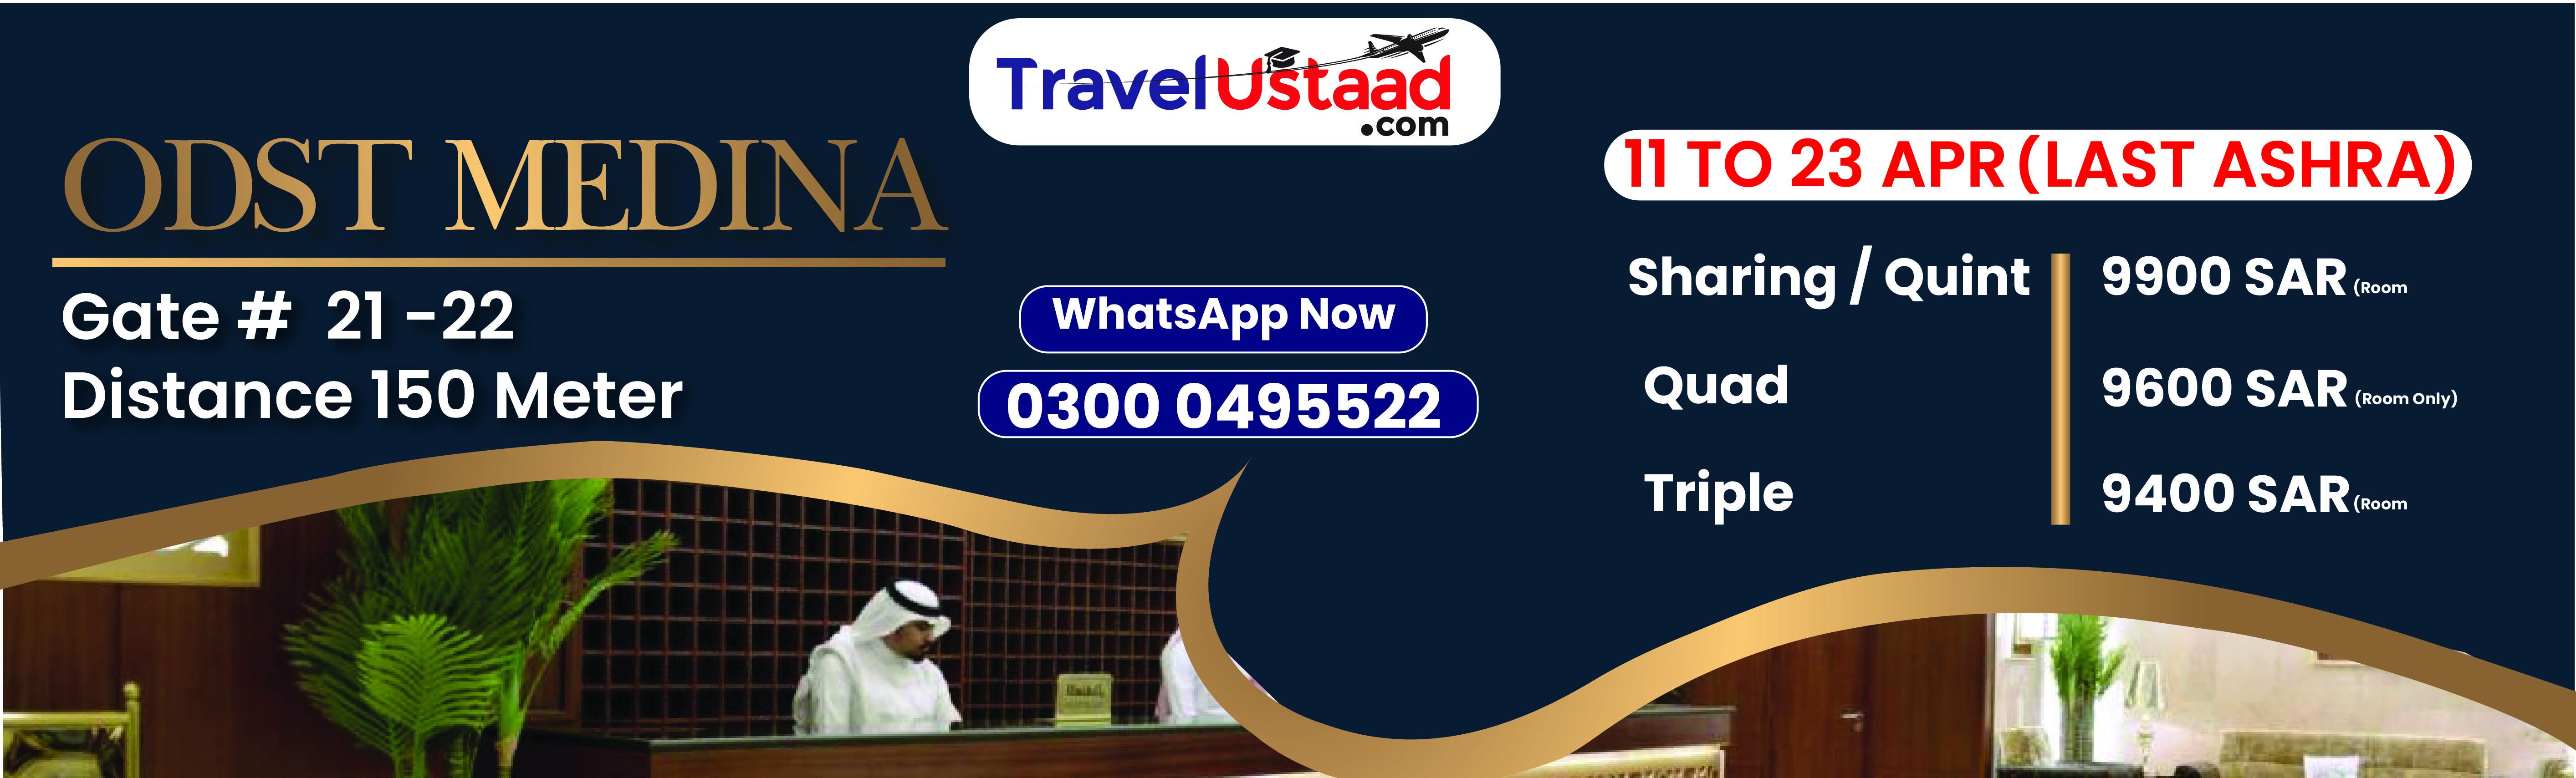 Embrace Your Beautiful Journey With Travelustaad